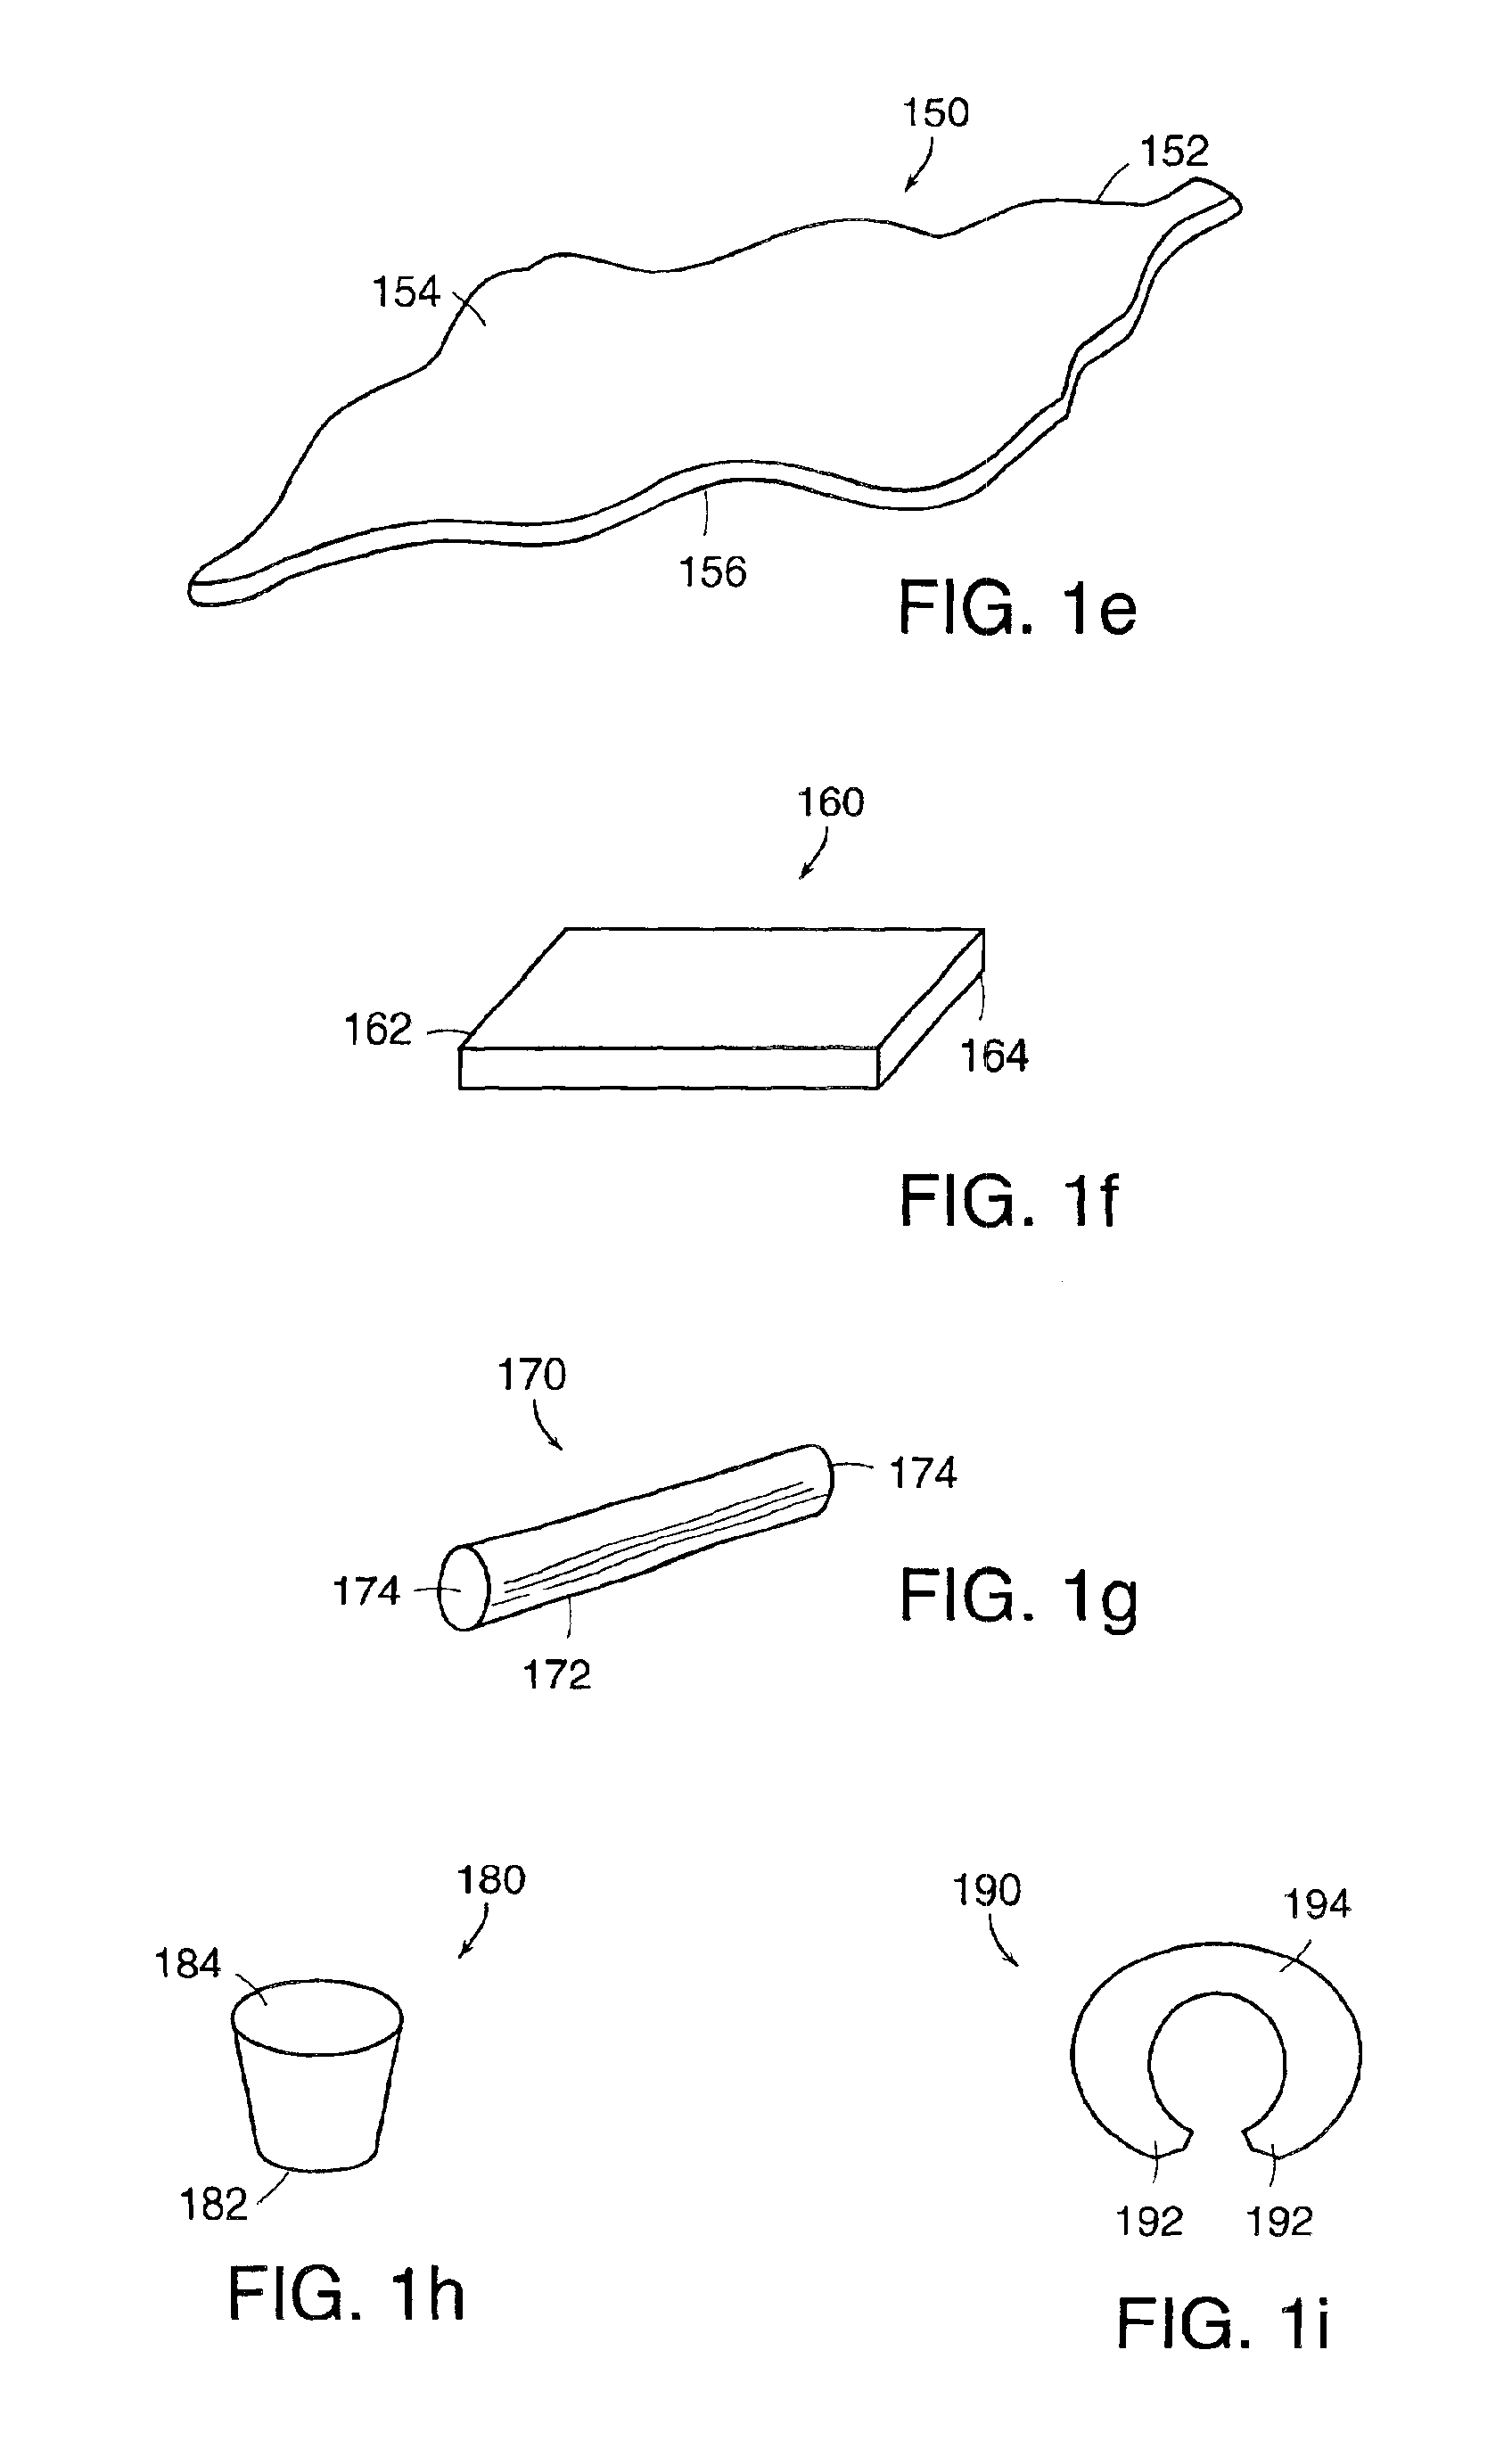 Controlling resorption of bioresorbable medical implant material